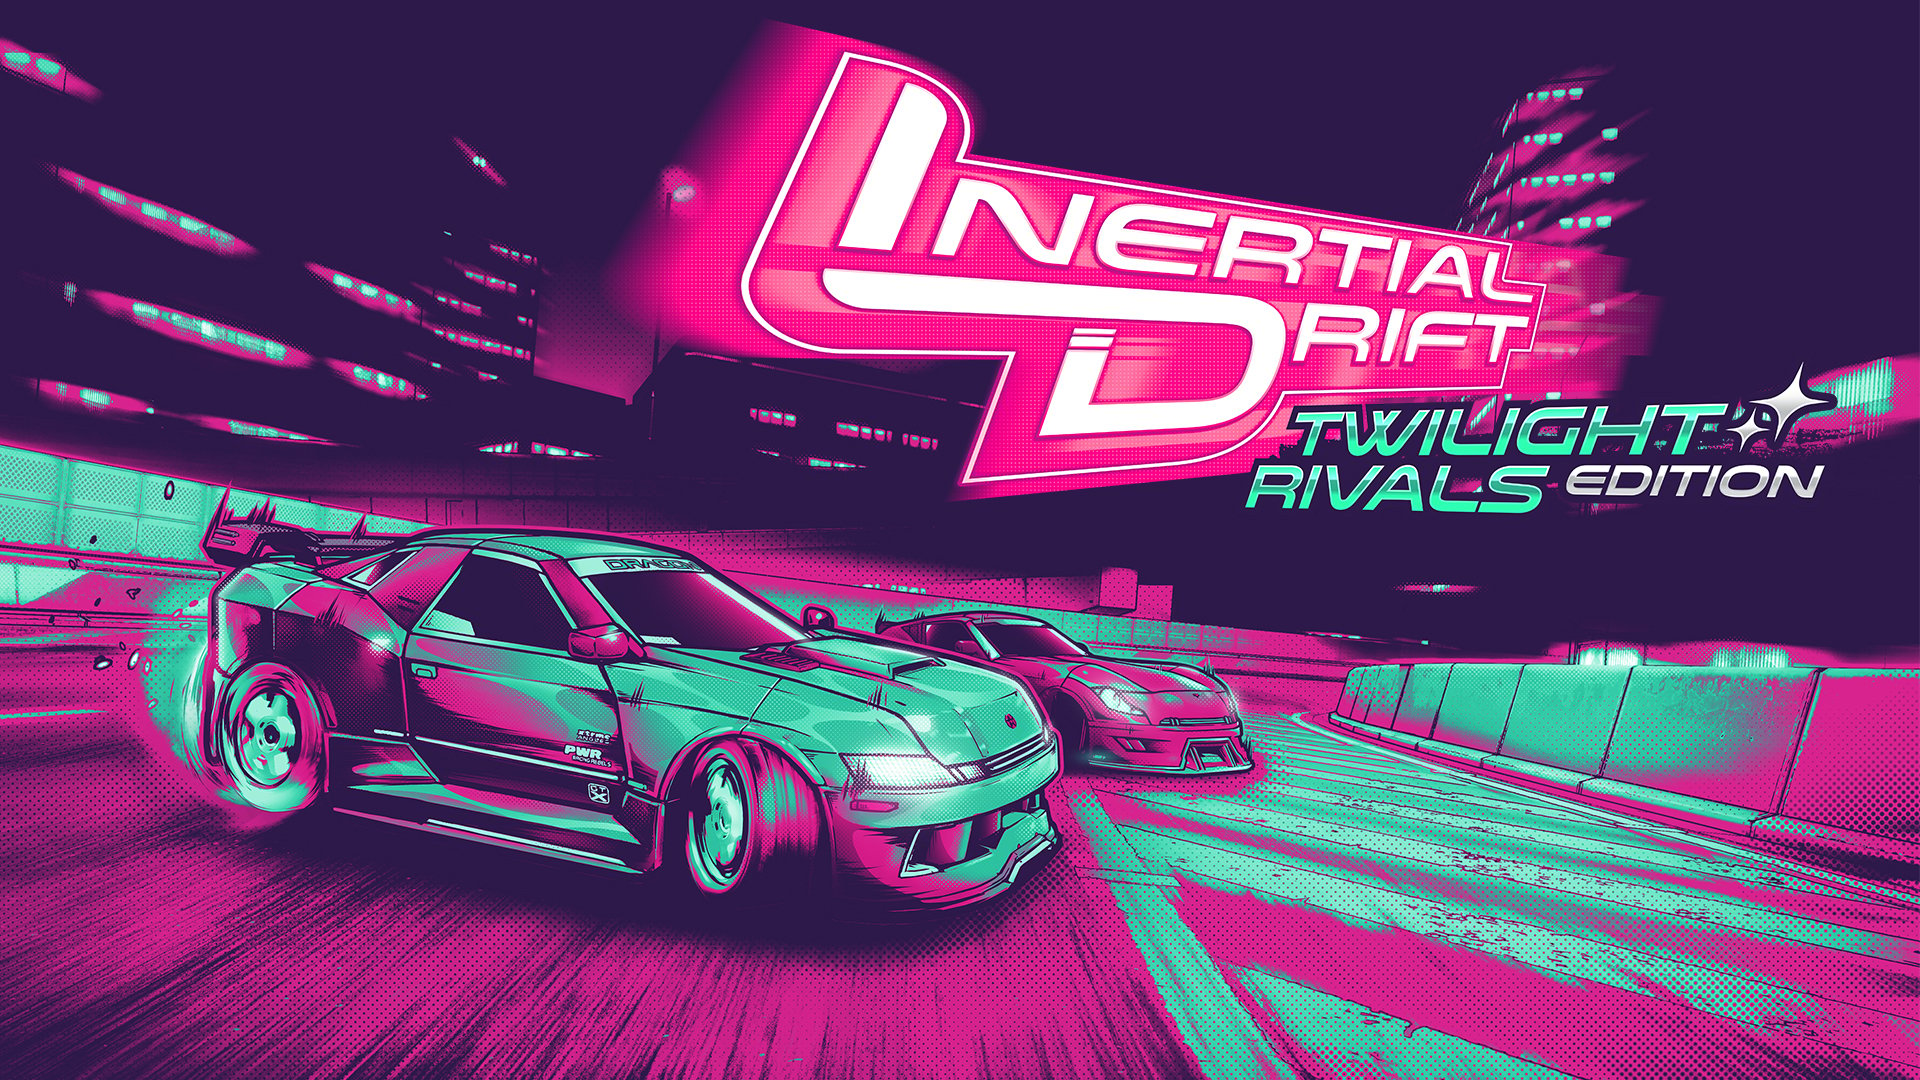 #
      Inertial Drift: Twilight Rivals Edition announced for PS5, Xbox Series